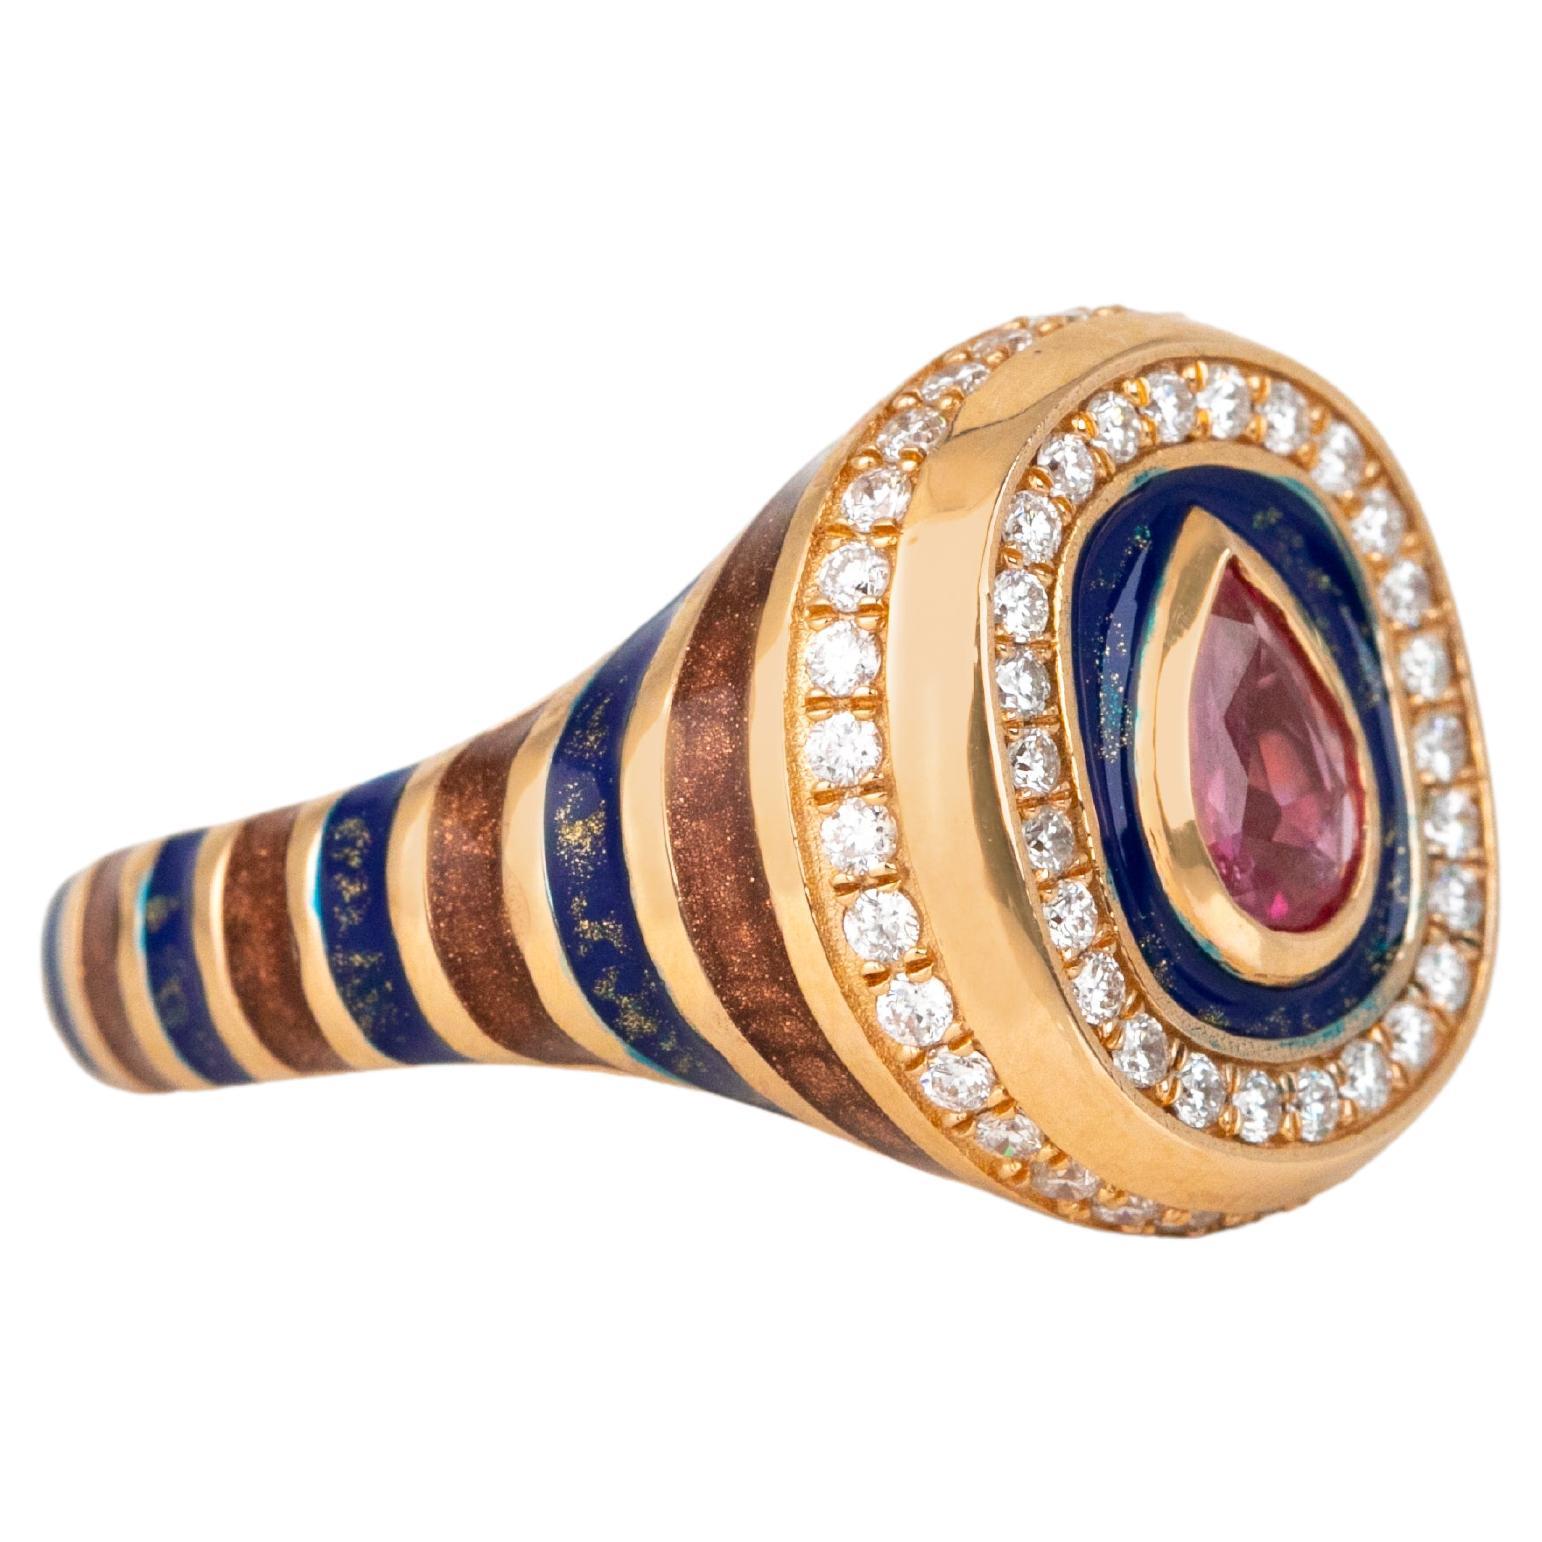 For Sale:  14K Gold 0.50 Ct Tourmaline & Diamond Enameled Cocktail Ring, Chevalier Ring 2